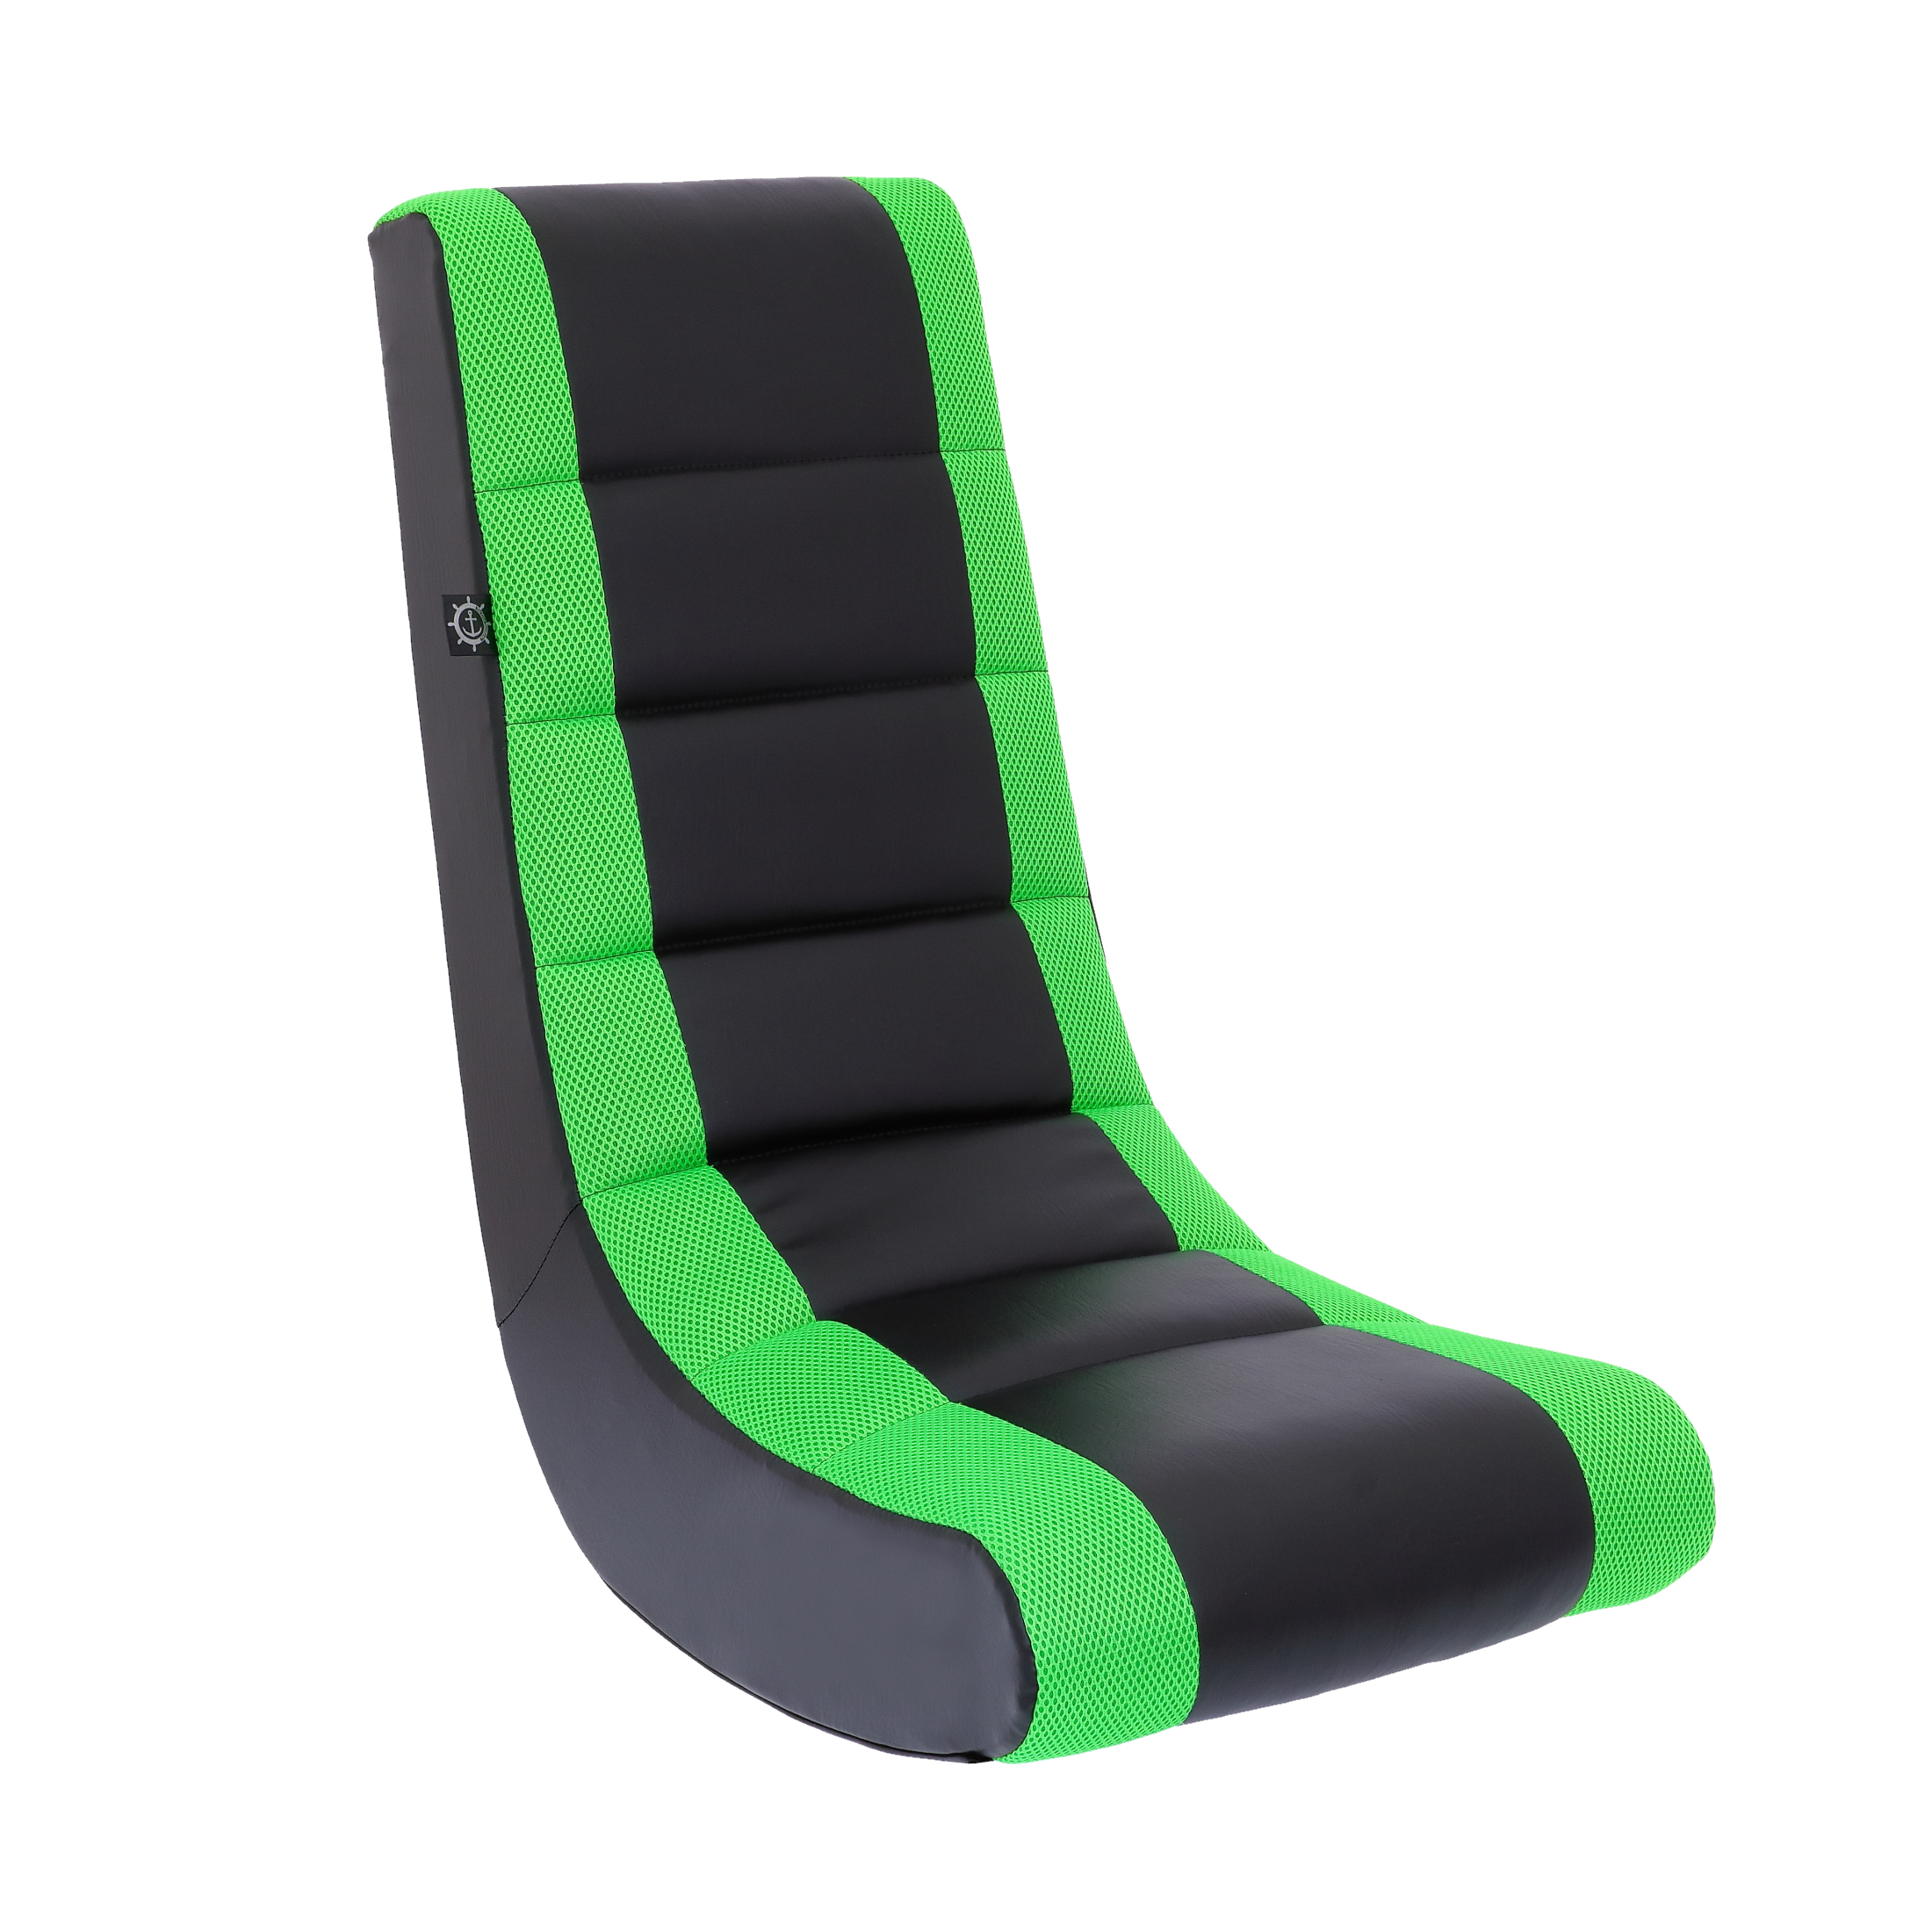 The Crew Furniture Classic Video Rocker Floor Gaming Chair, Kids and Teens, PU Faux Leather & Polyester Mesh, Black/Green - image 1 of 10